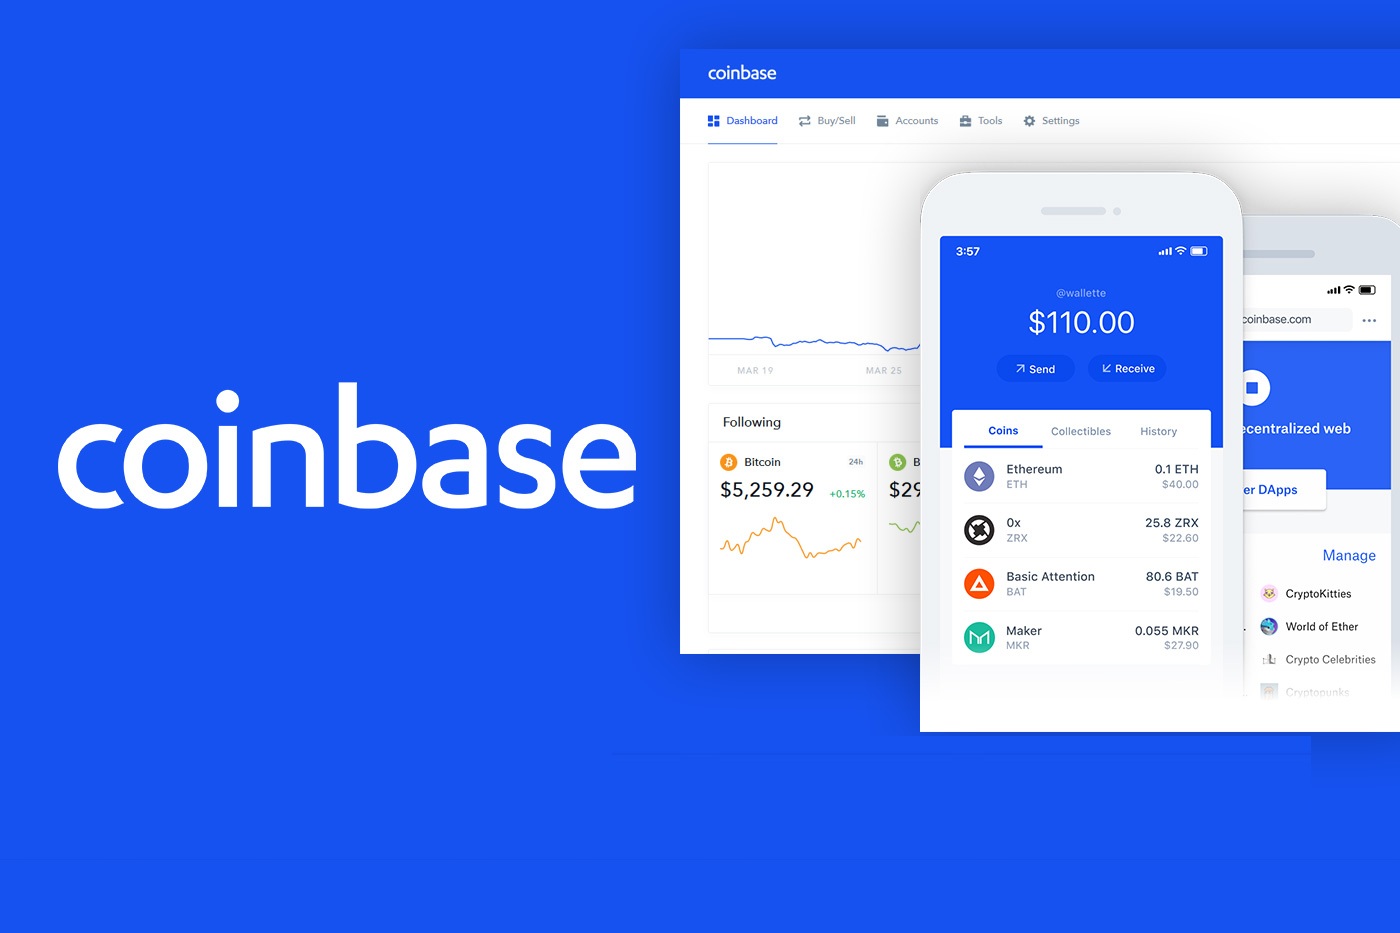 coinbase total deposits